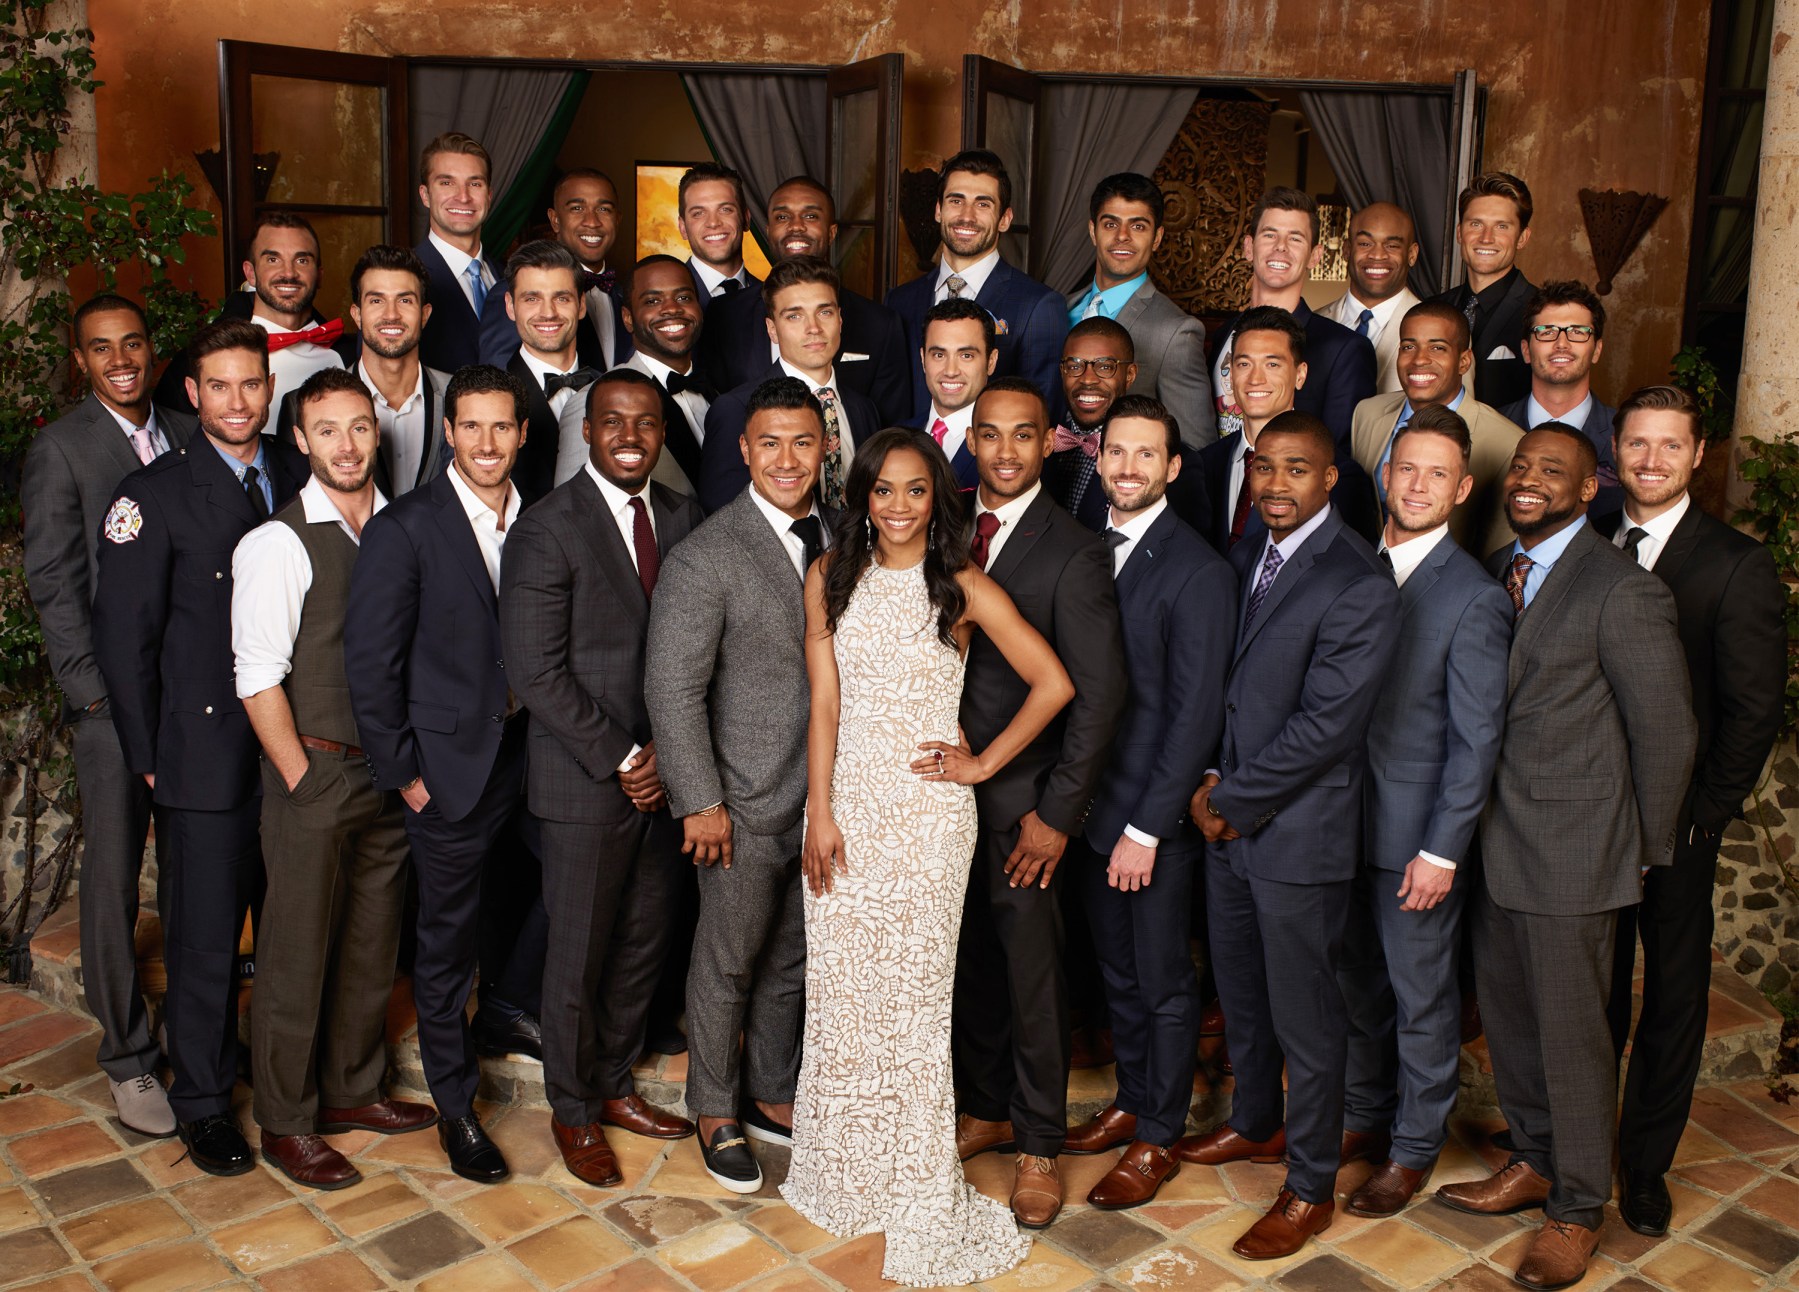 Here Are the Top 5 Best 'Bachelorettes' of All Time Ranked